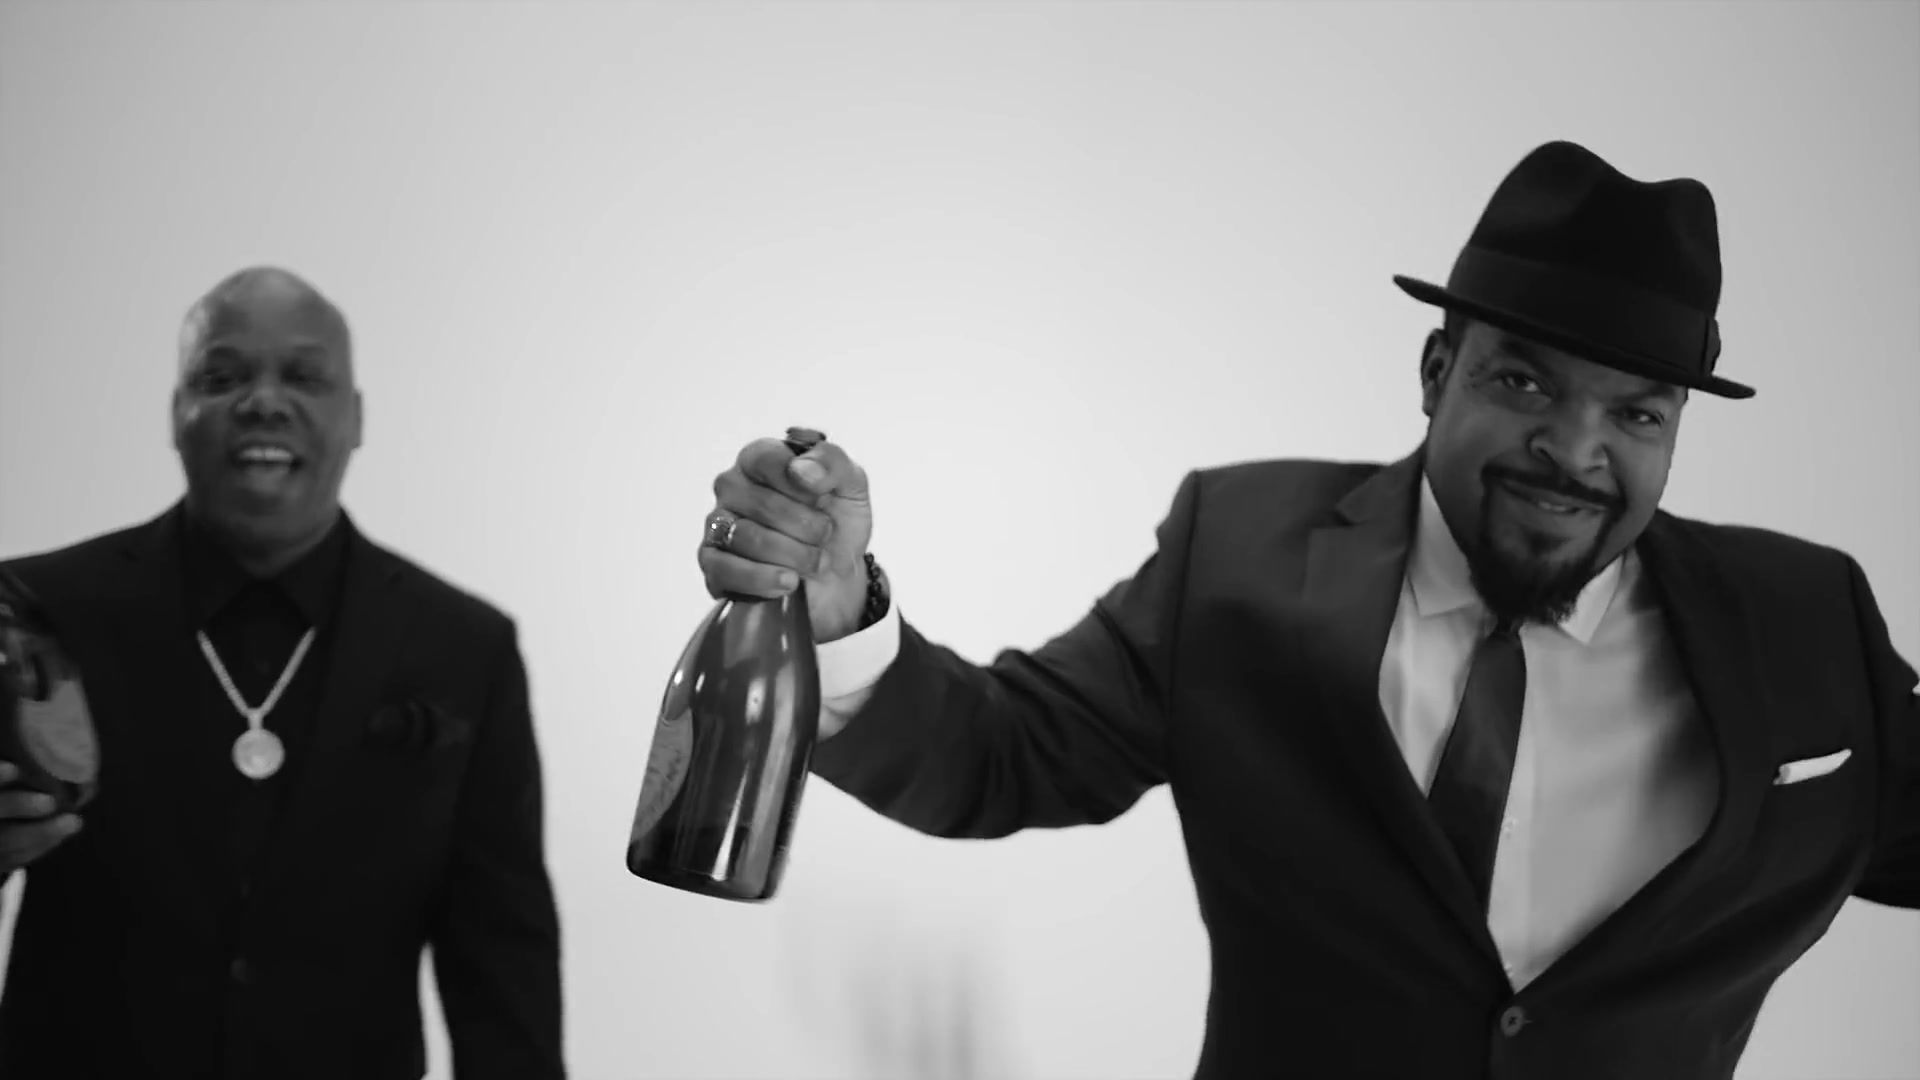 Ice cube feat. Ice Cube Champagne. Ice Cube клипы. Ain't got no Haters Ice Cube. Warren g ft Ice Cube.